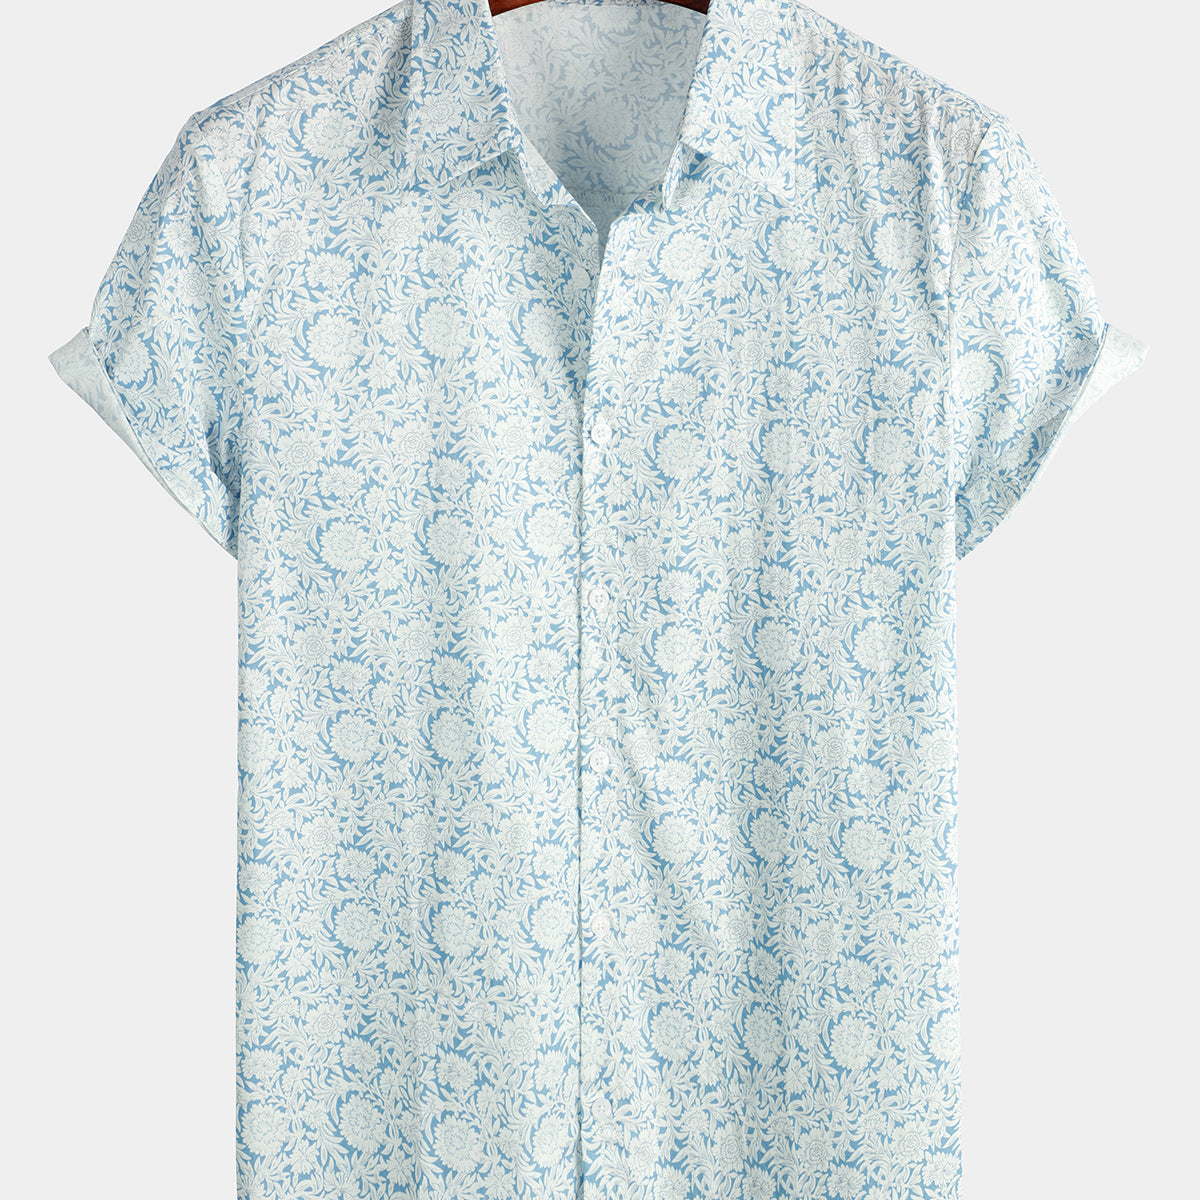 Men's Floral Printed Holiday Cotton Causal Shirt